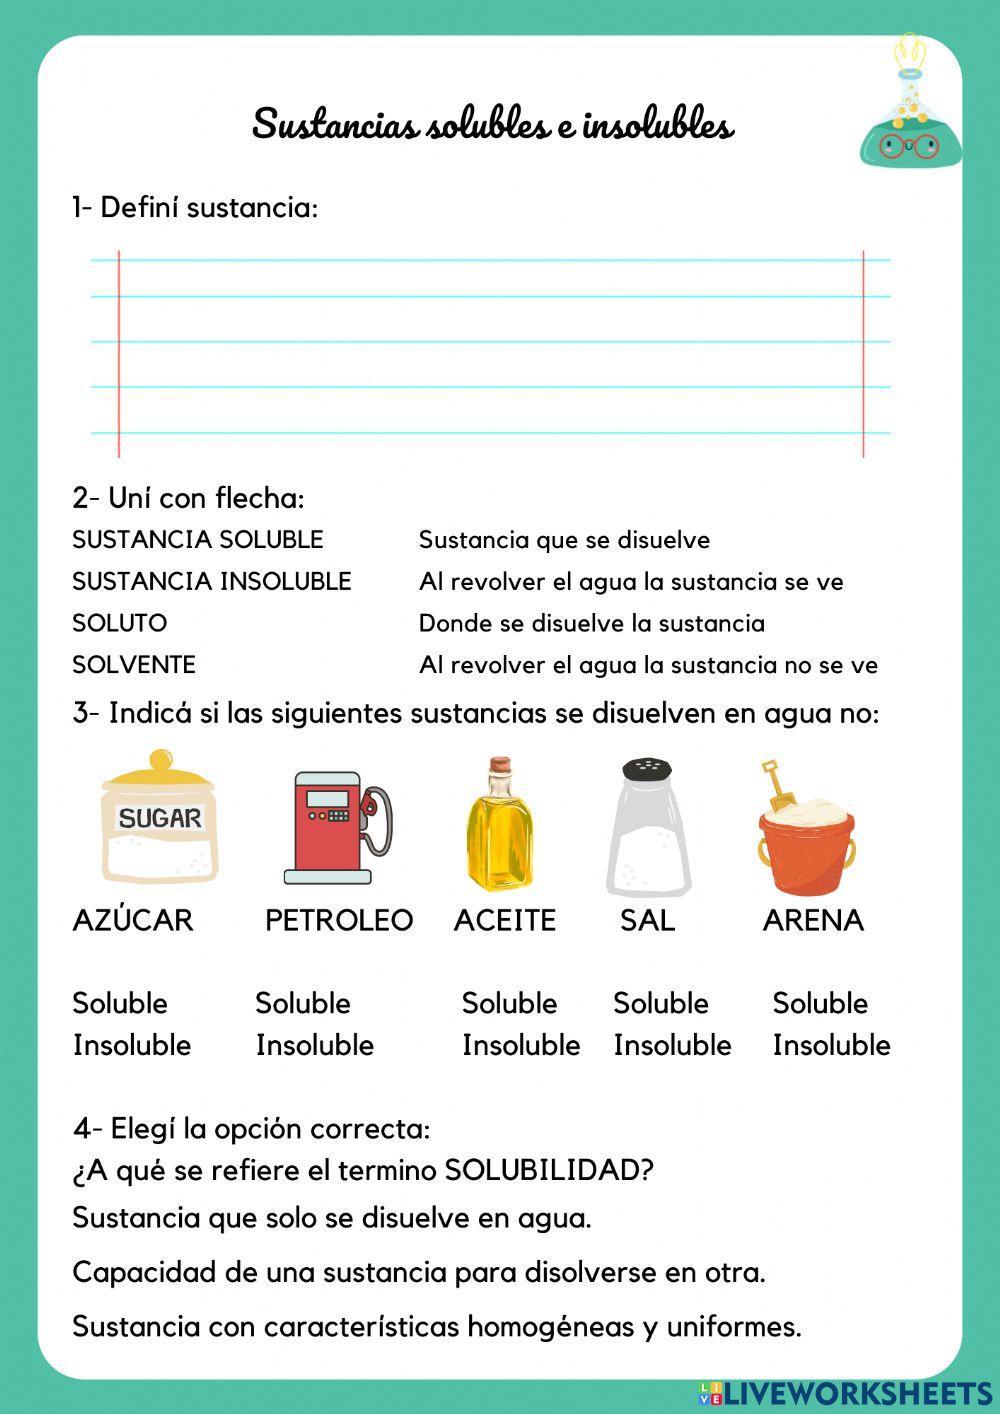 Sustancias solubles e insolubles